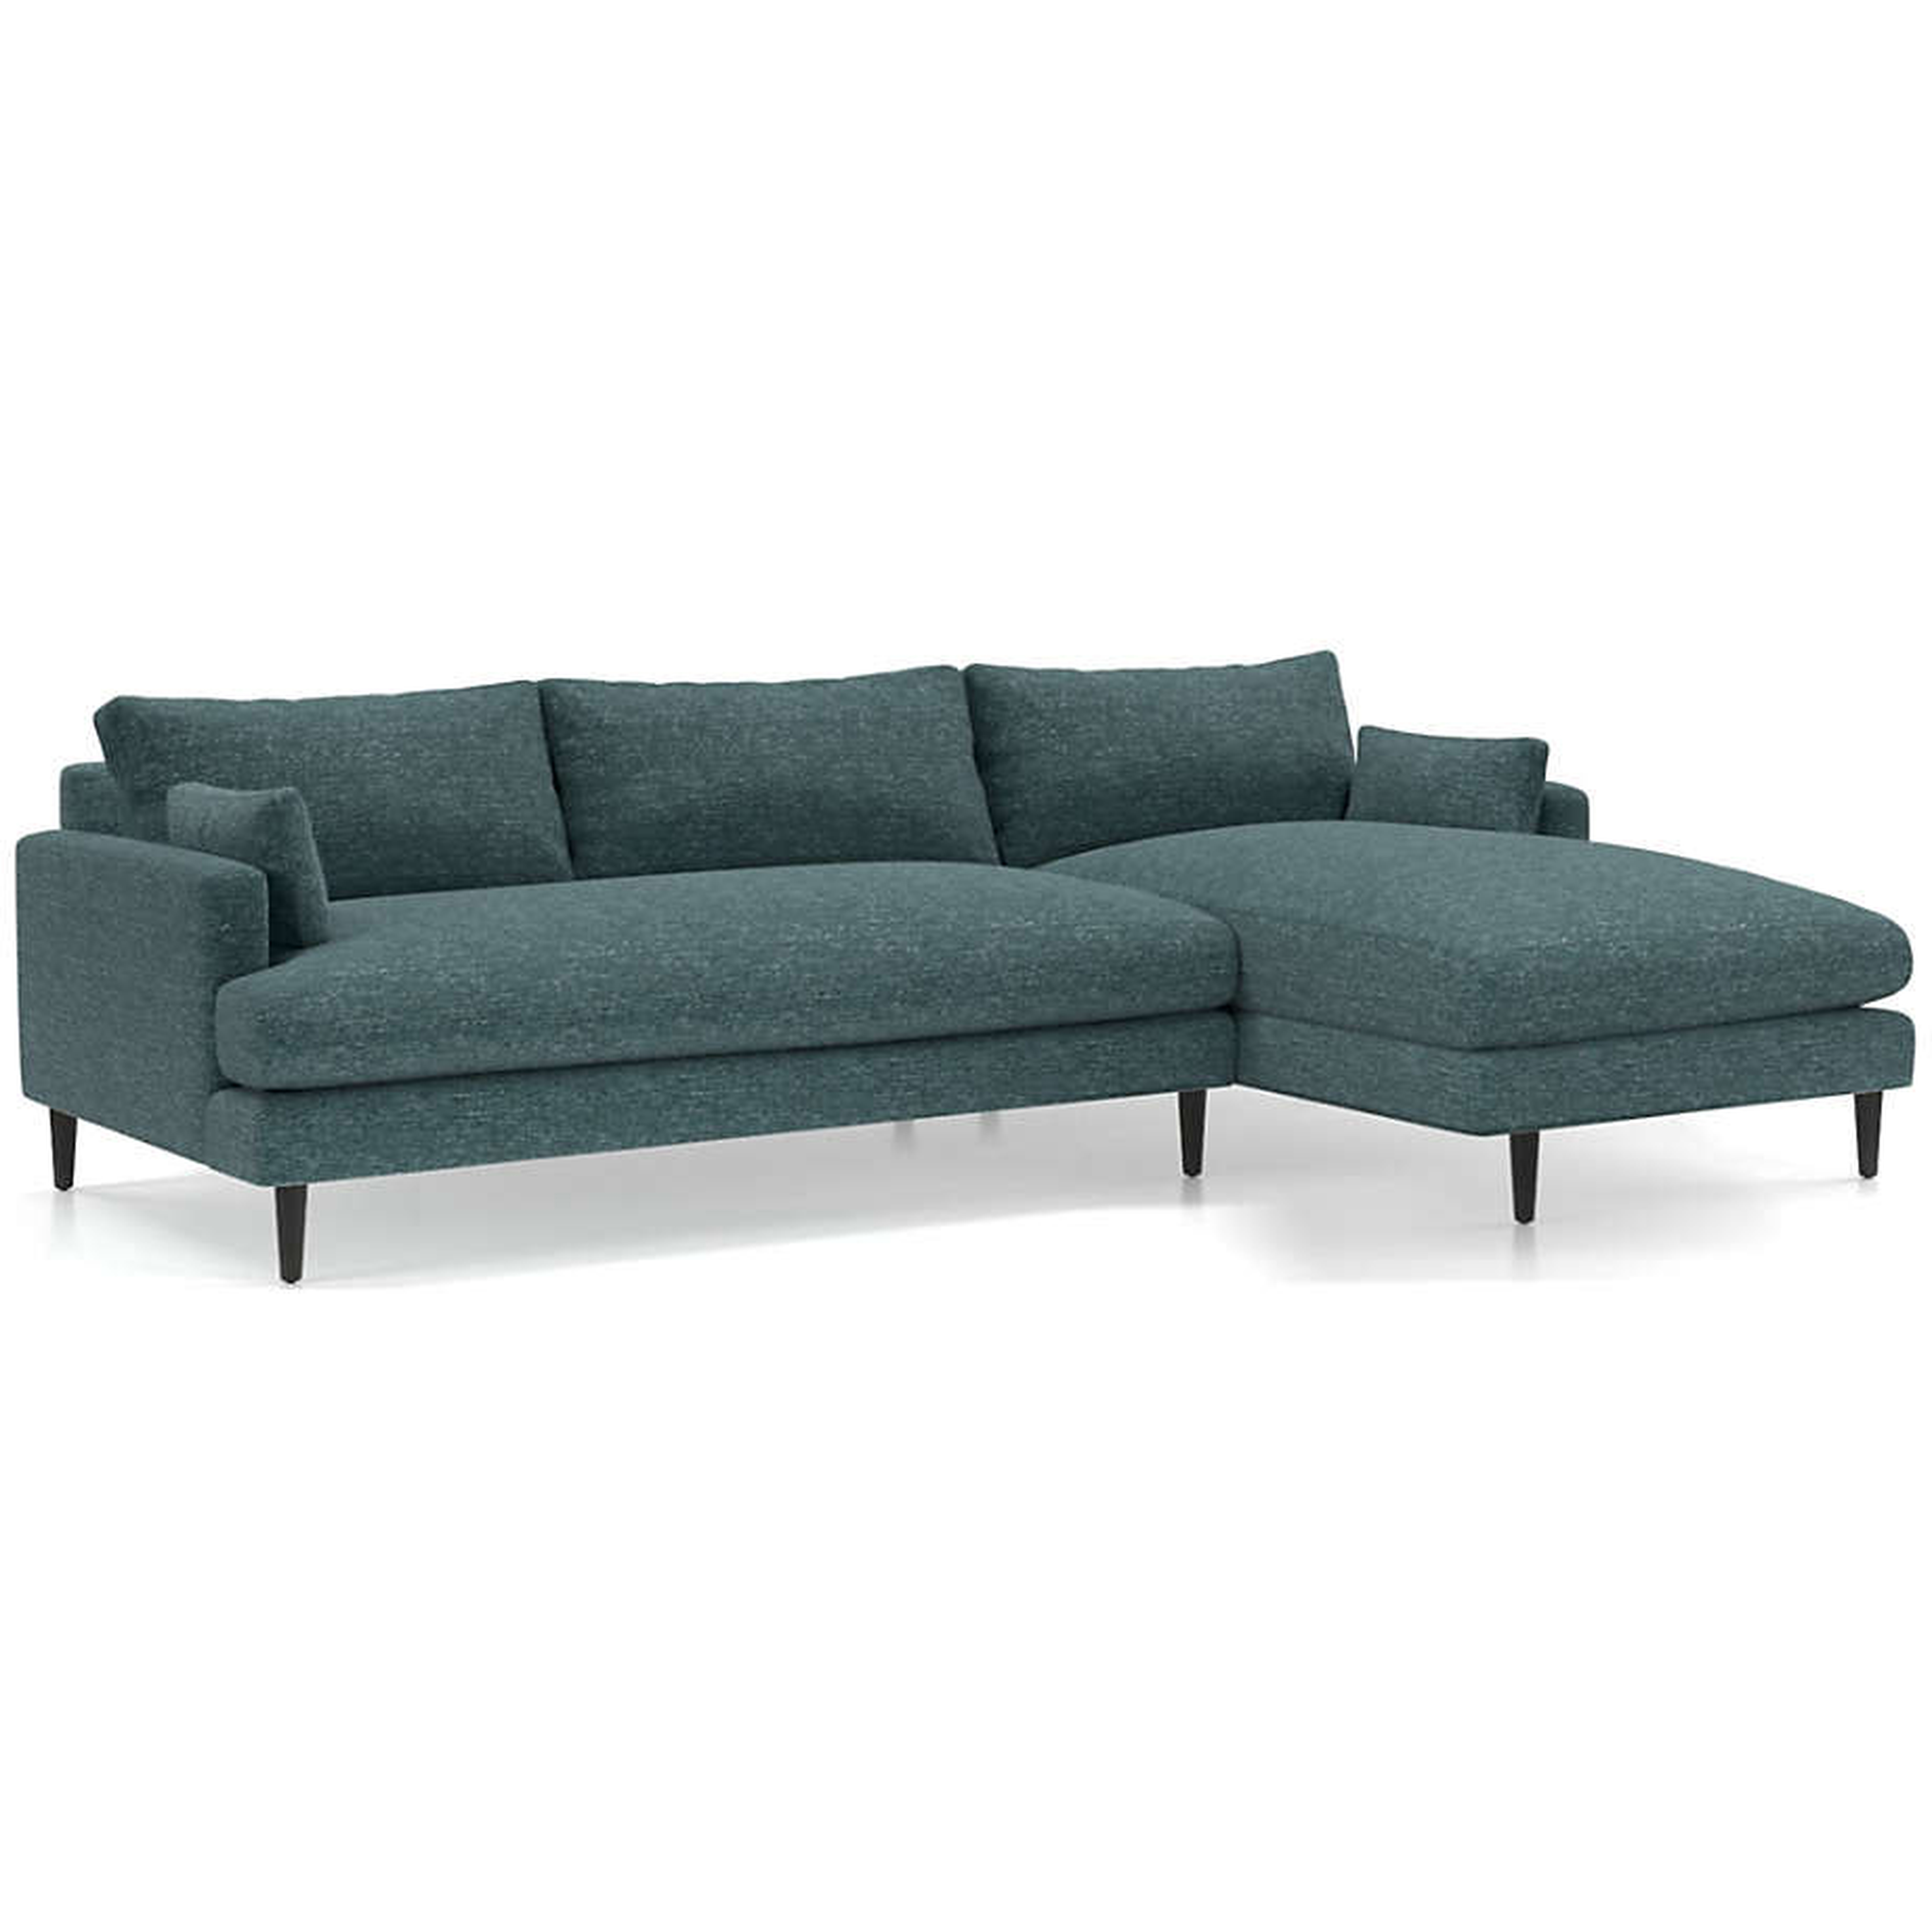 Monahan 2-Piece Right Arm Chaise Sectional - Crate and Barrel